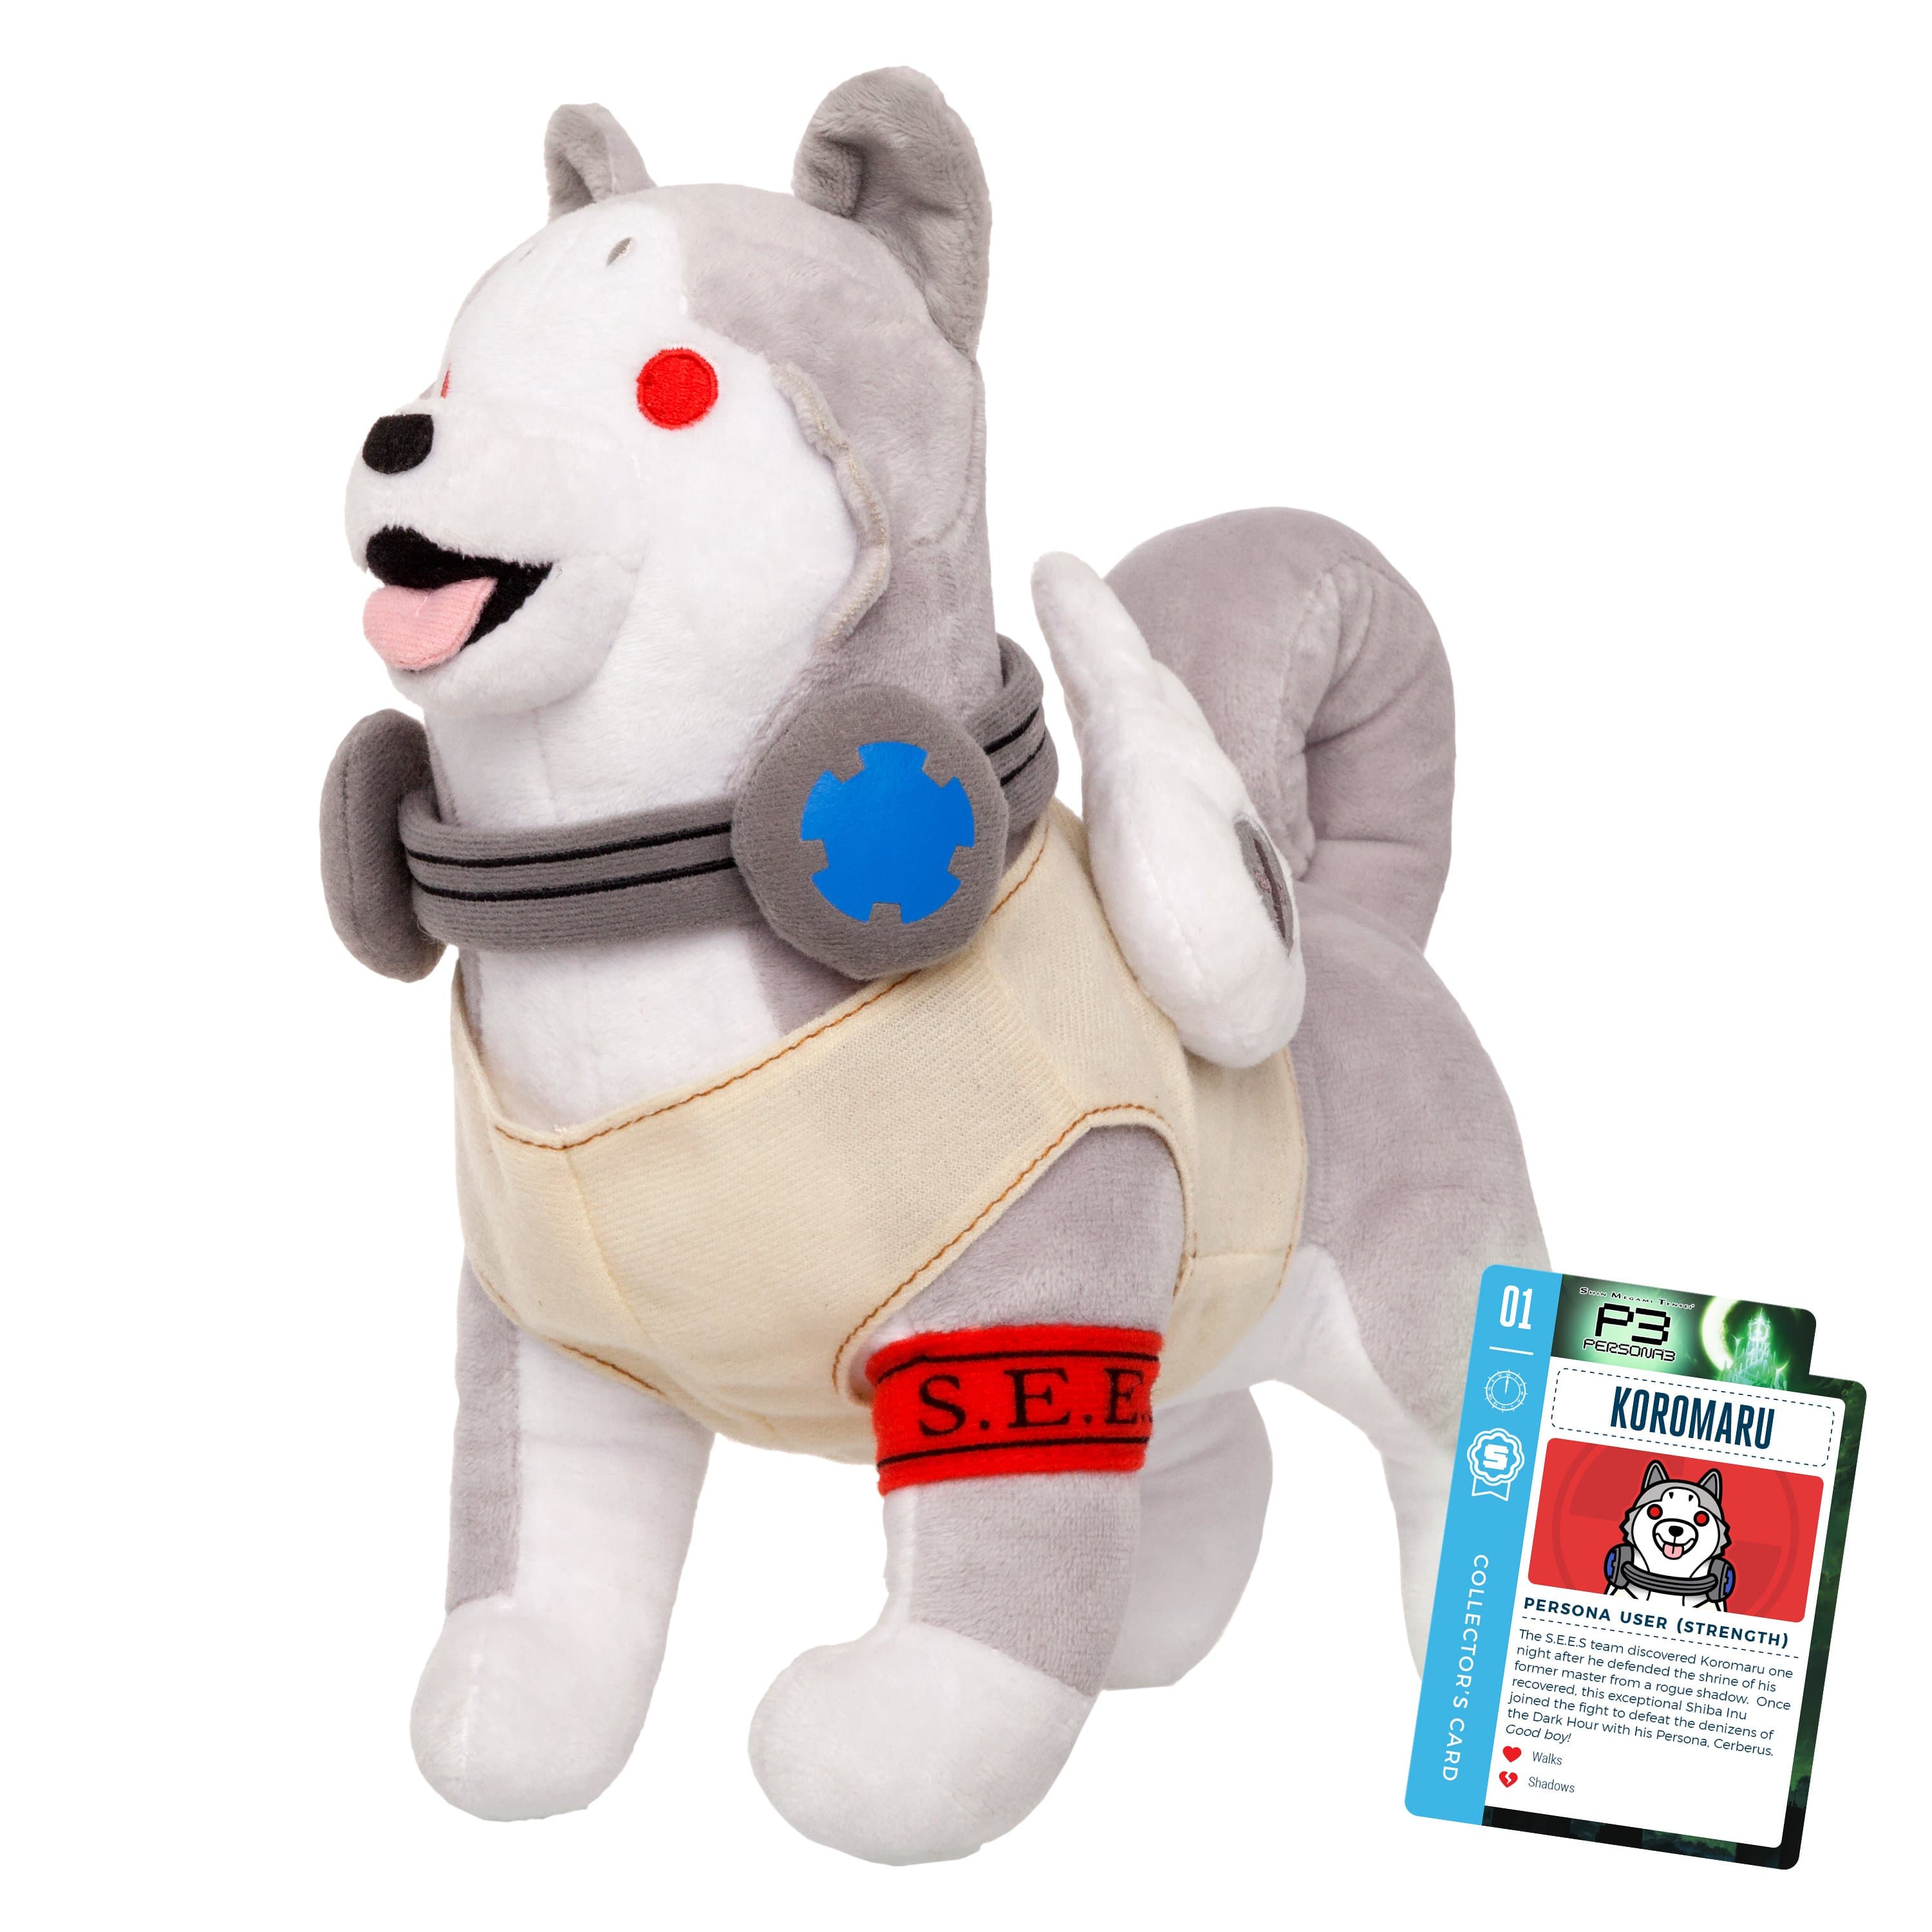 Persona 3 - Koromaru Collector's Plush Stuffed Toy With Collector's Card